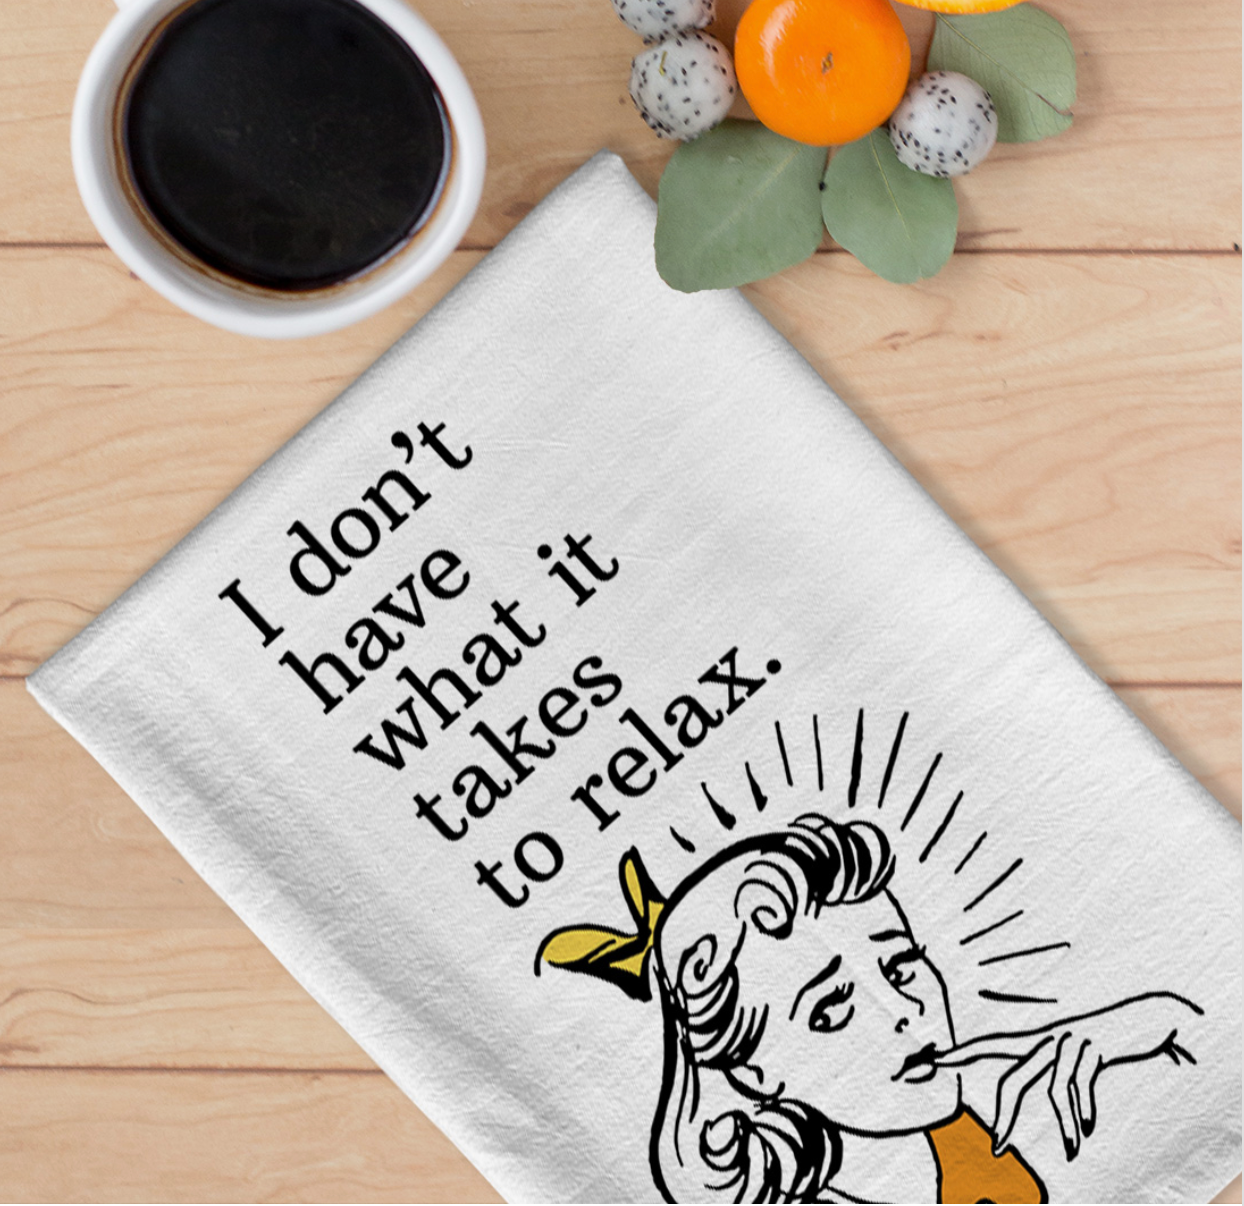 "I don't have what it takes to relax" dish towel